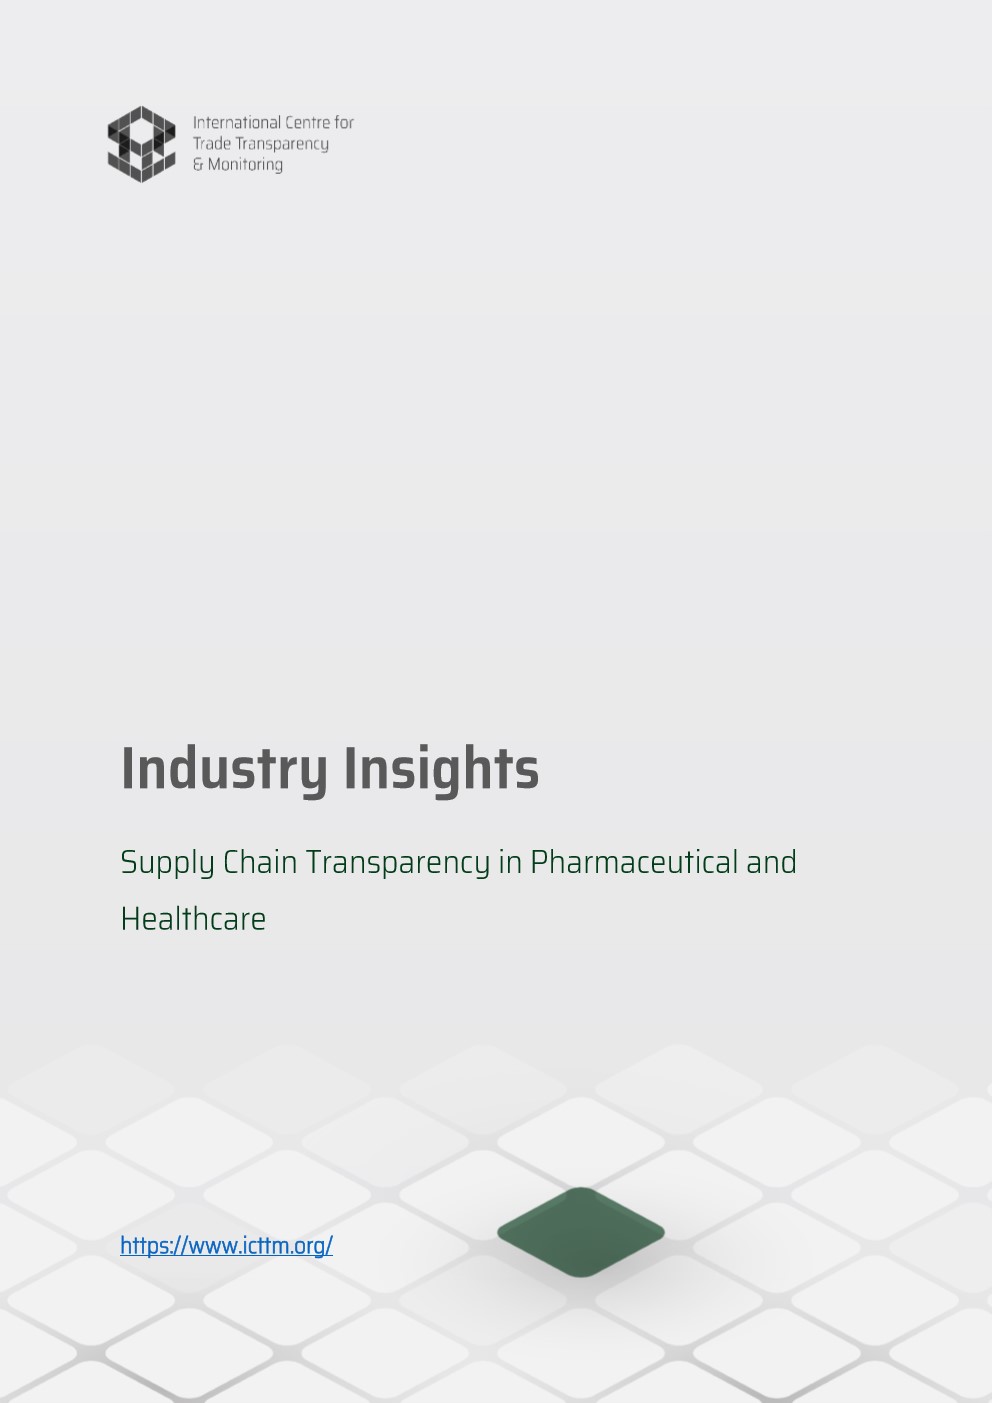 Supply Chain Transparency in Pharmaceutical and Healthcare